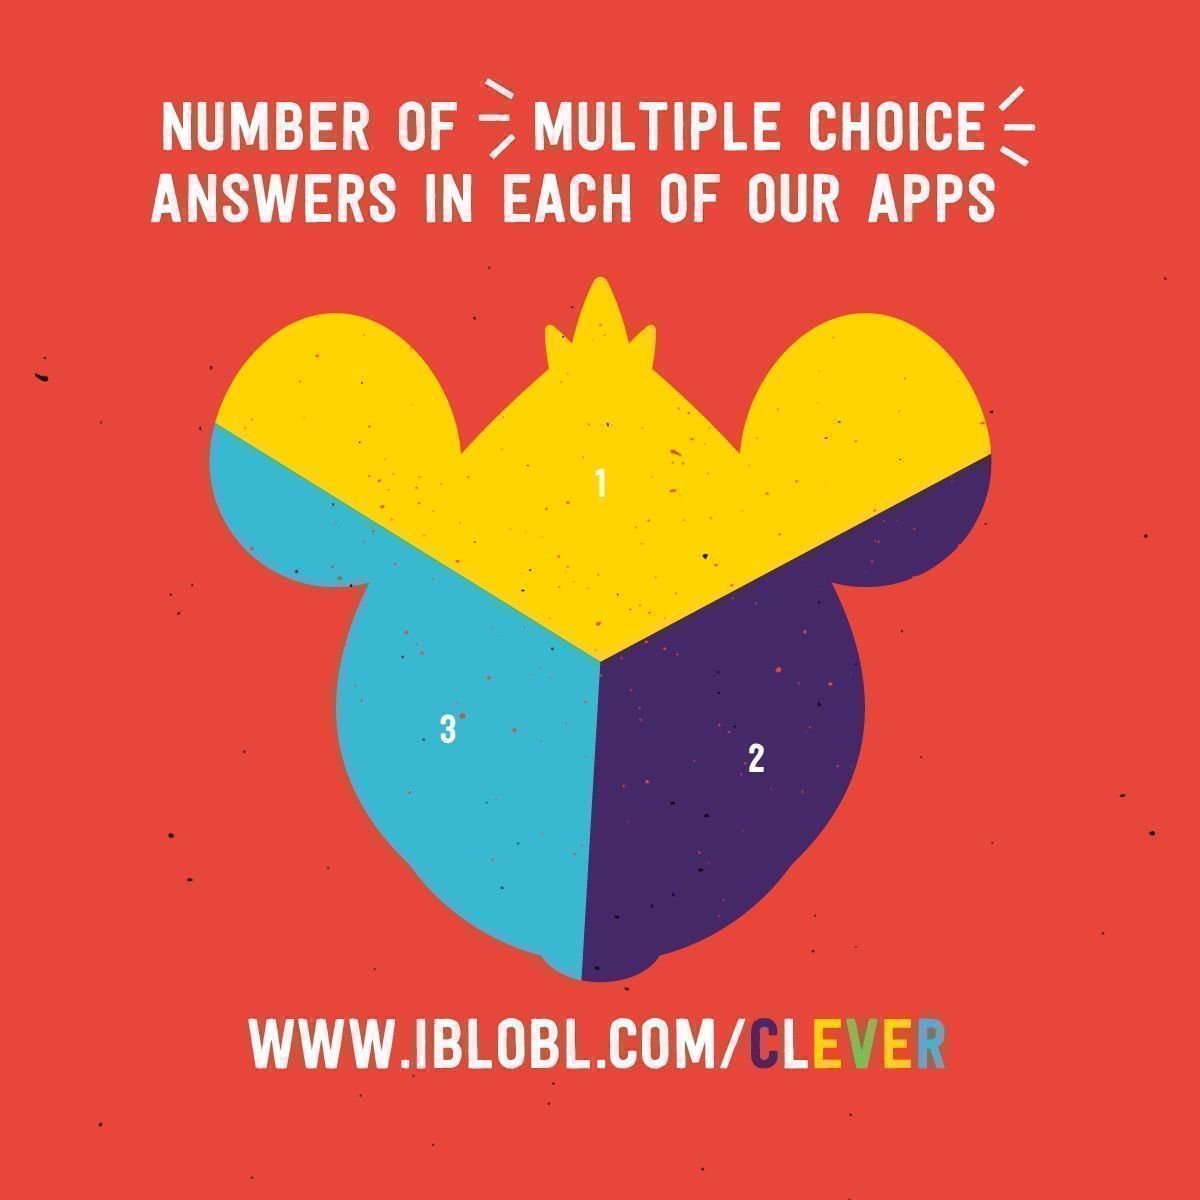 Get #clever with #Ibbleobble #games for #kids! apple.co/1PNFlet #apps #children #teach #learn #teachers #homeschool #multiplication #words #subreaction #addition #sequences #payterns #timestables #division #appstore